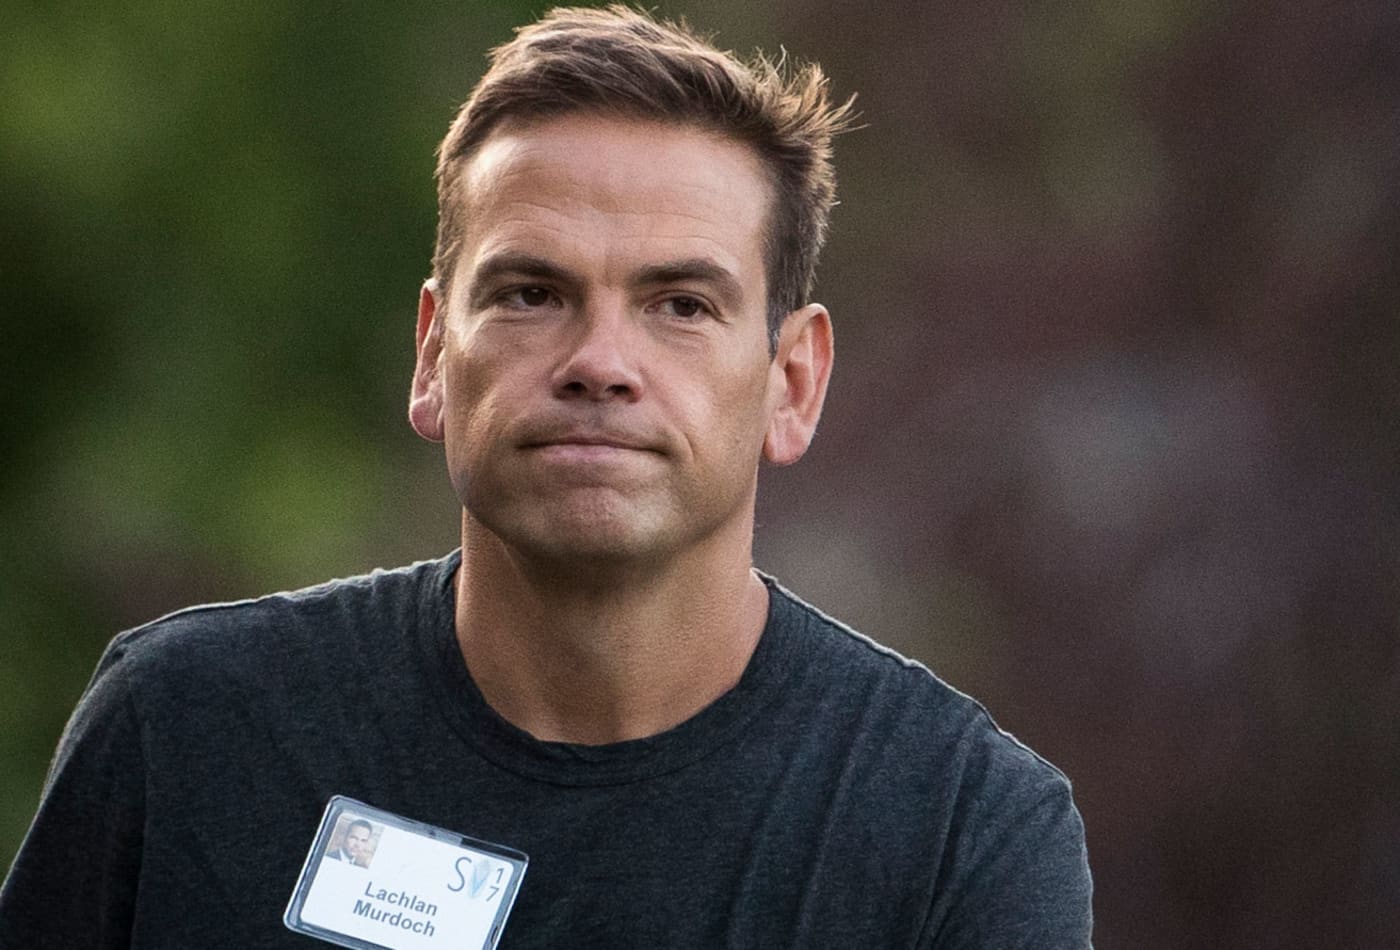 Lachlan Murdoch News, Articles, Stories & Trends for Today